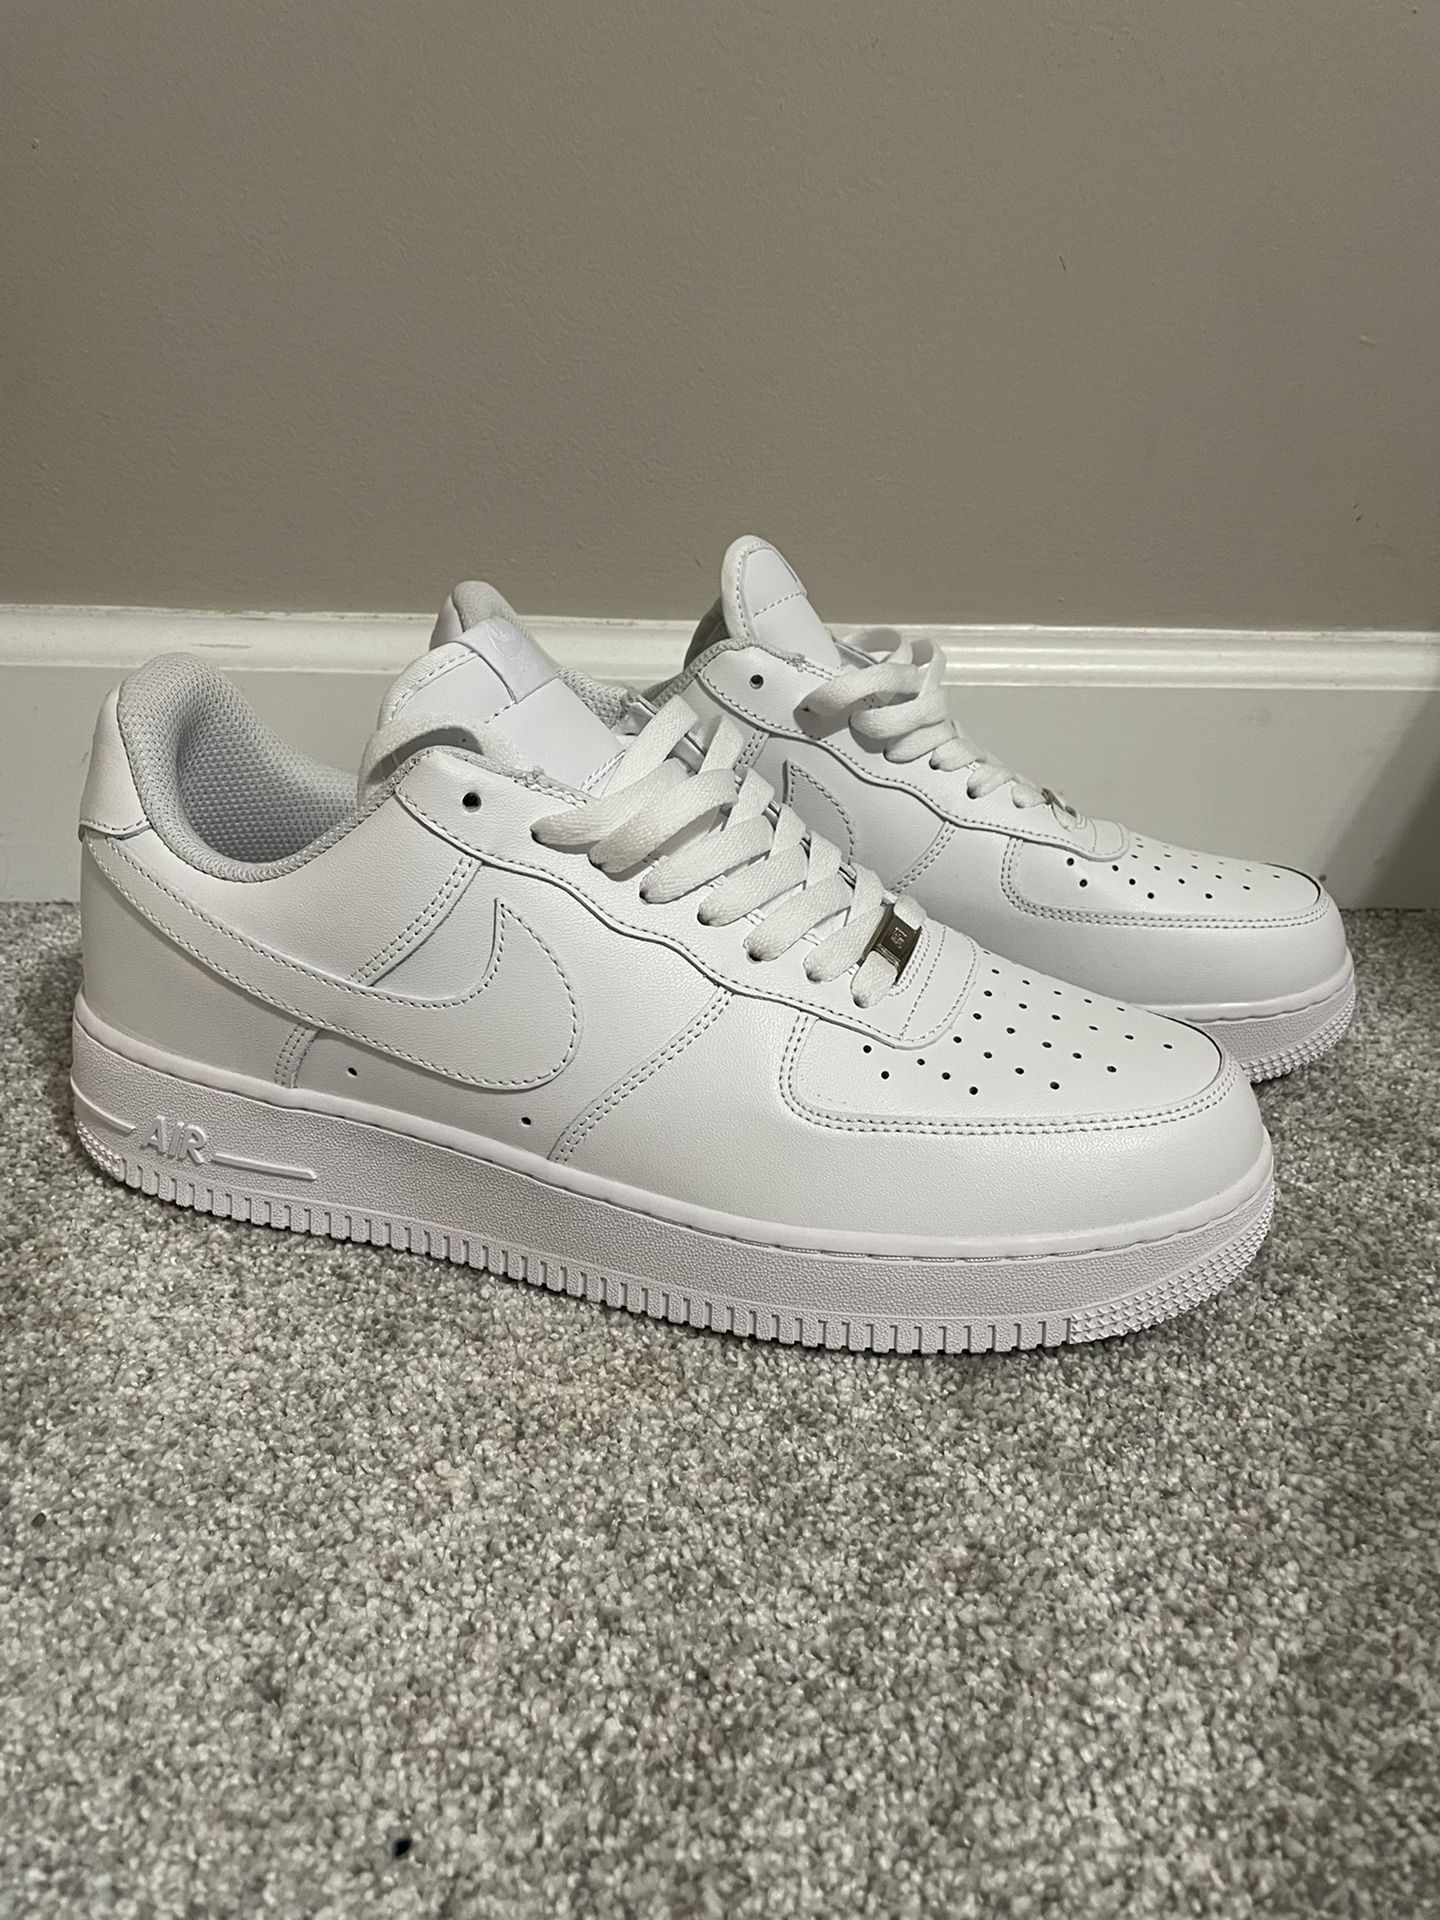 Nike Air Force 1 - Size 12